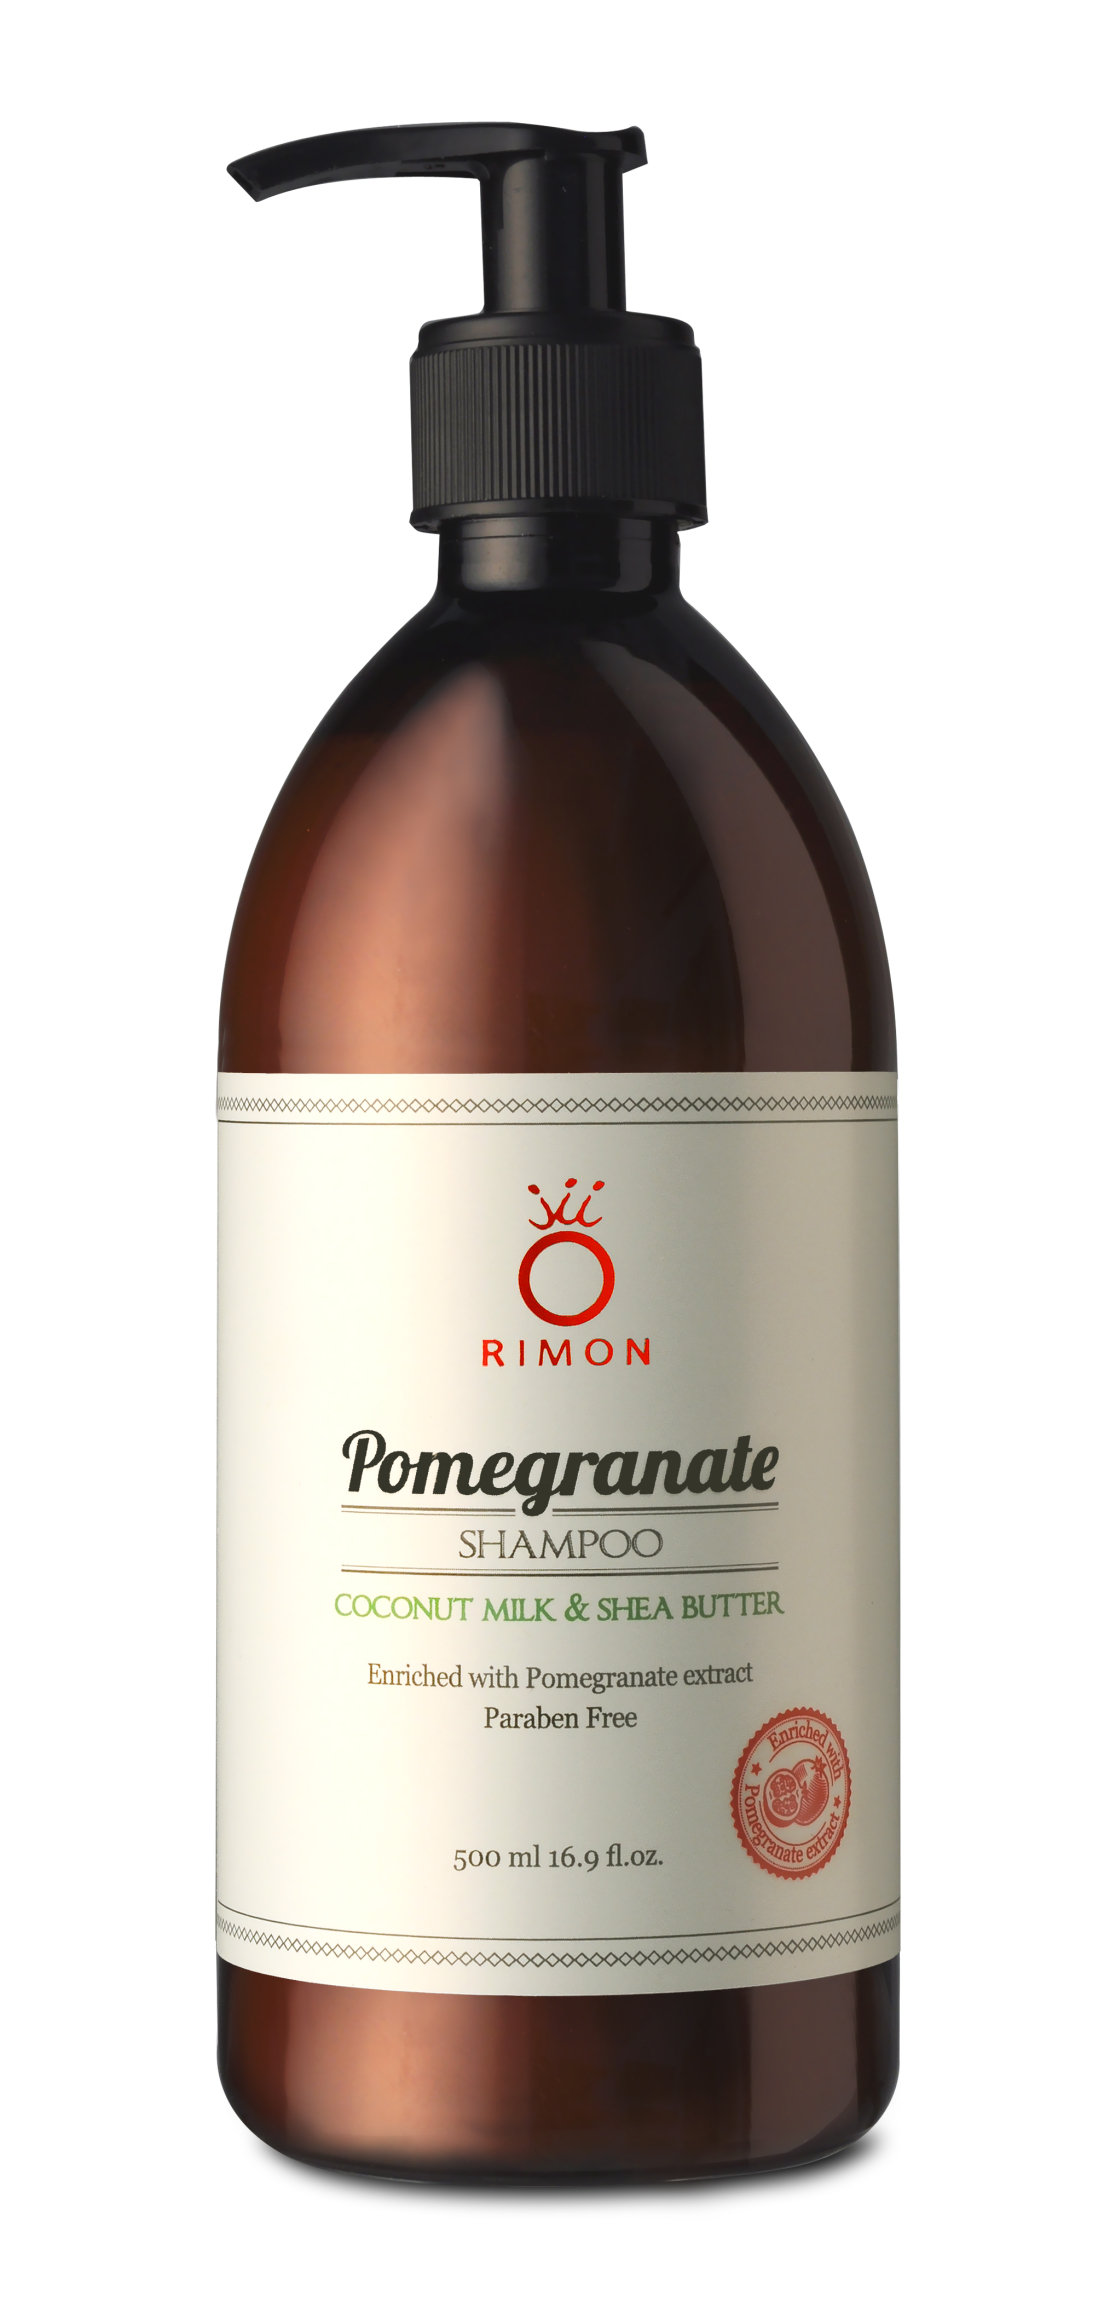 Shampoo Enriched with pomegranate extracts - Scents: Coconut milk and shea butter